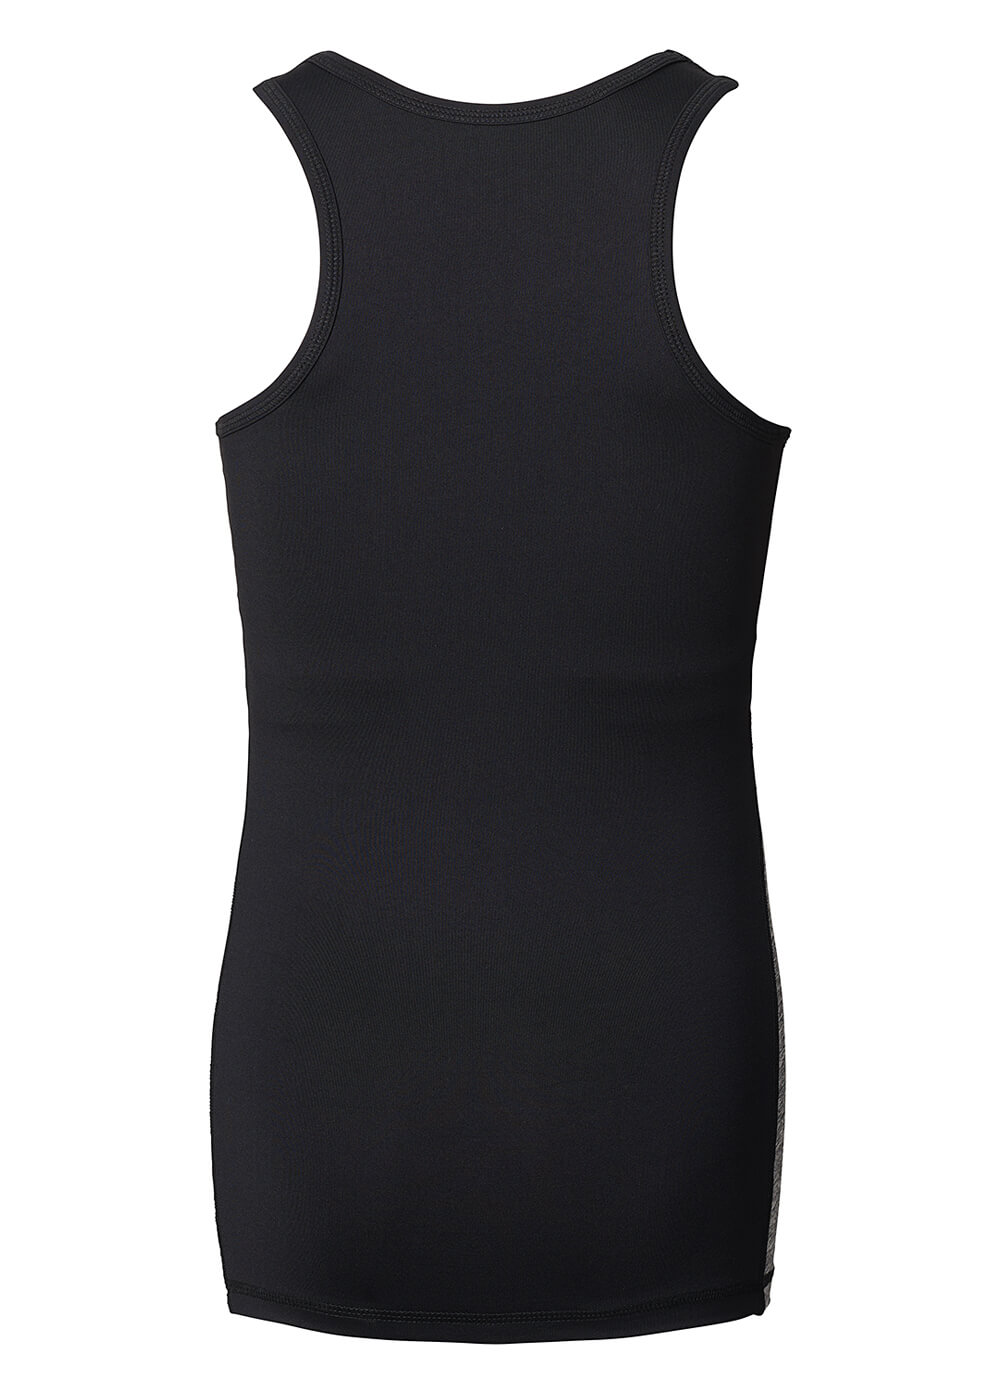 Maternity Active Sports Tank Top in Black by Esprit